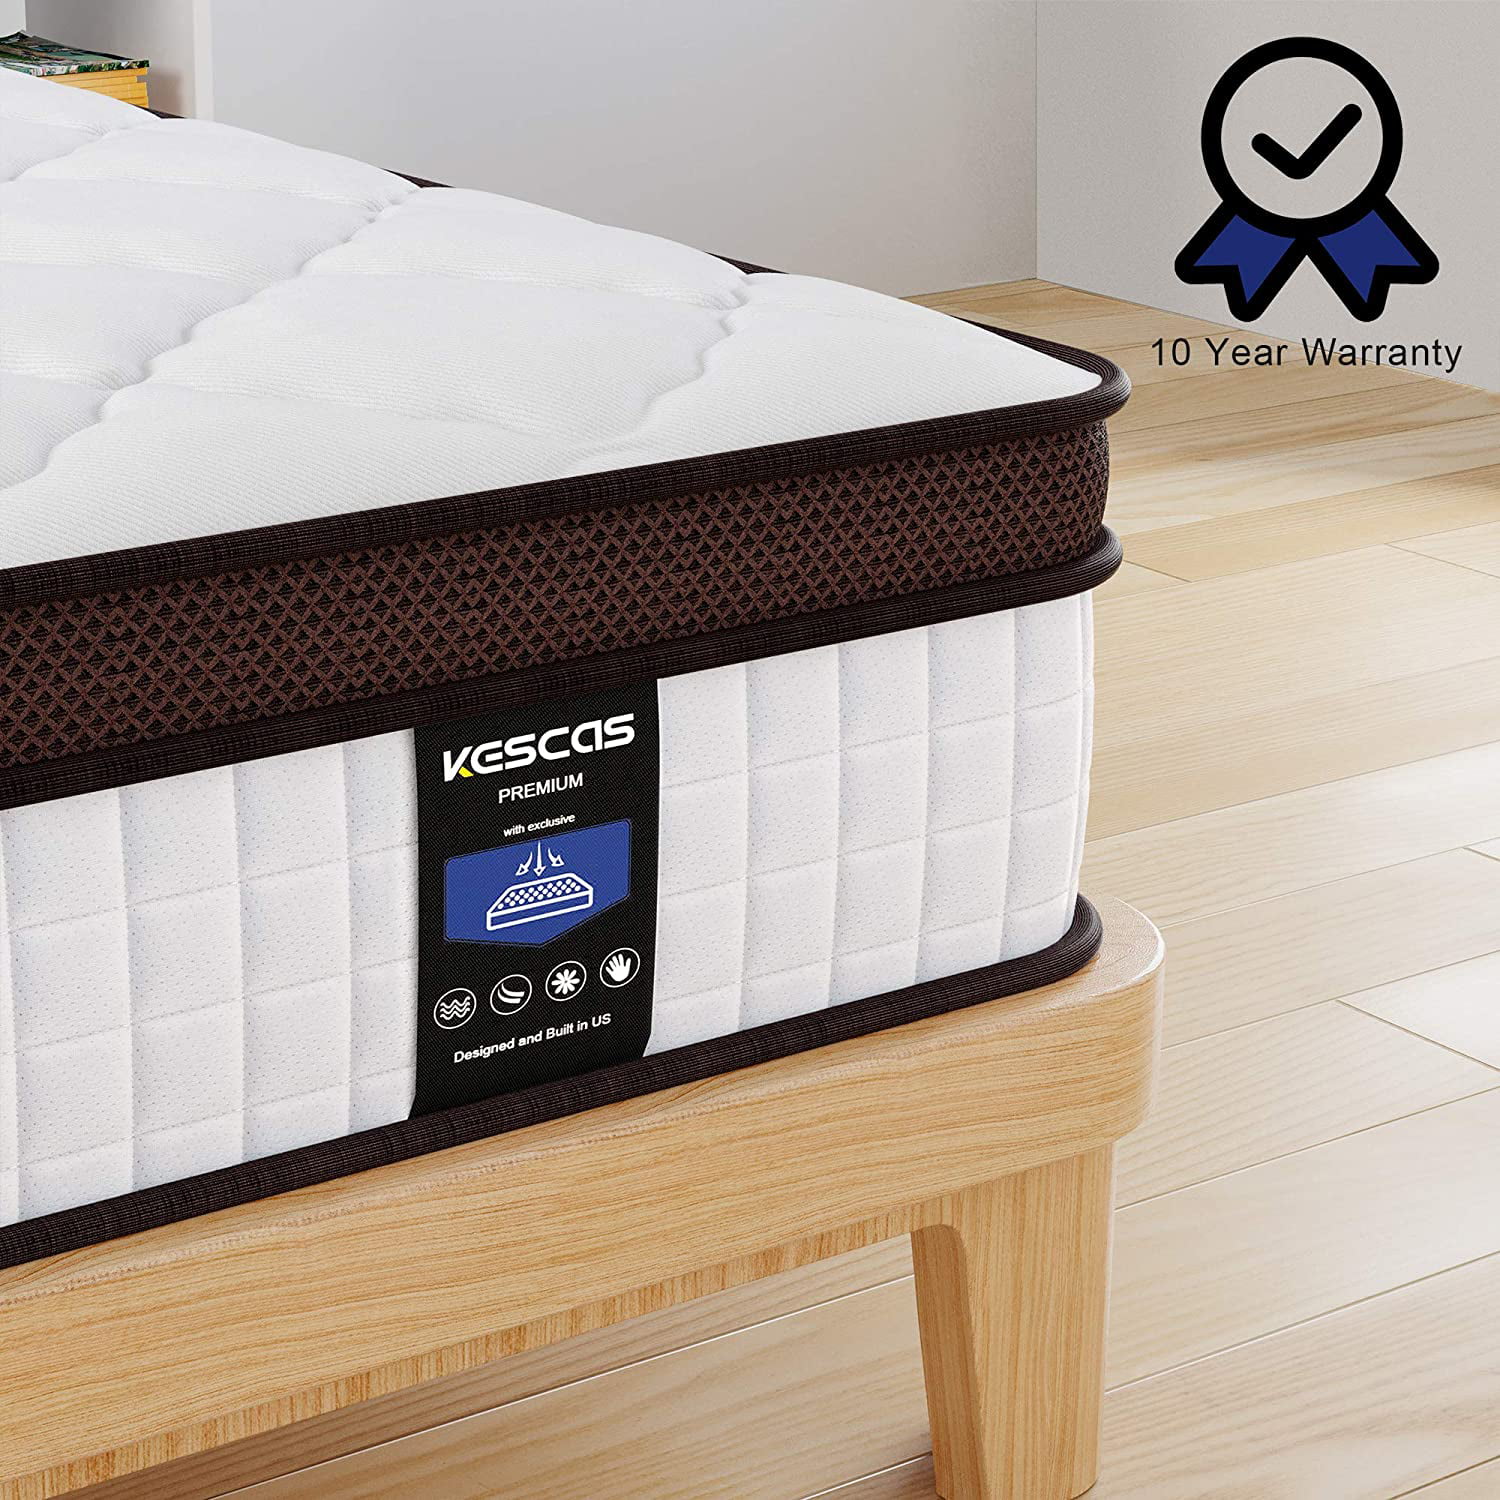 Full Pocket Spring Double Mattresses Full Mattress Kescas 10 inch Memory Foam and Innerspring Hybrid Mattress Medium Firm Feel with 100 Night Home Trial